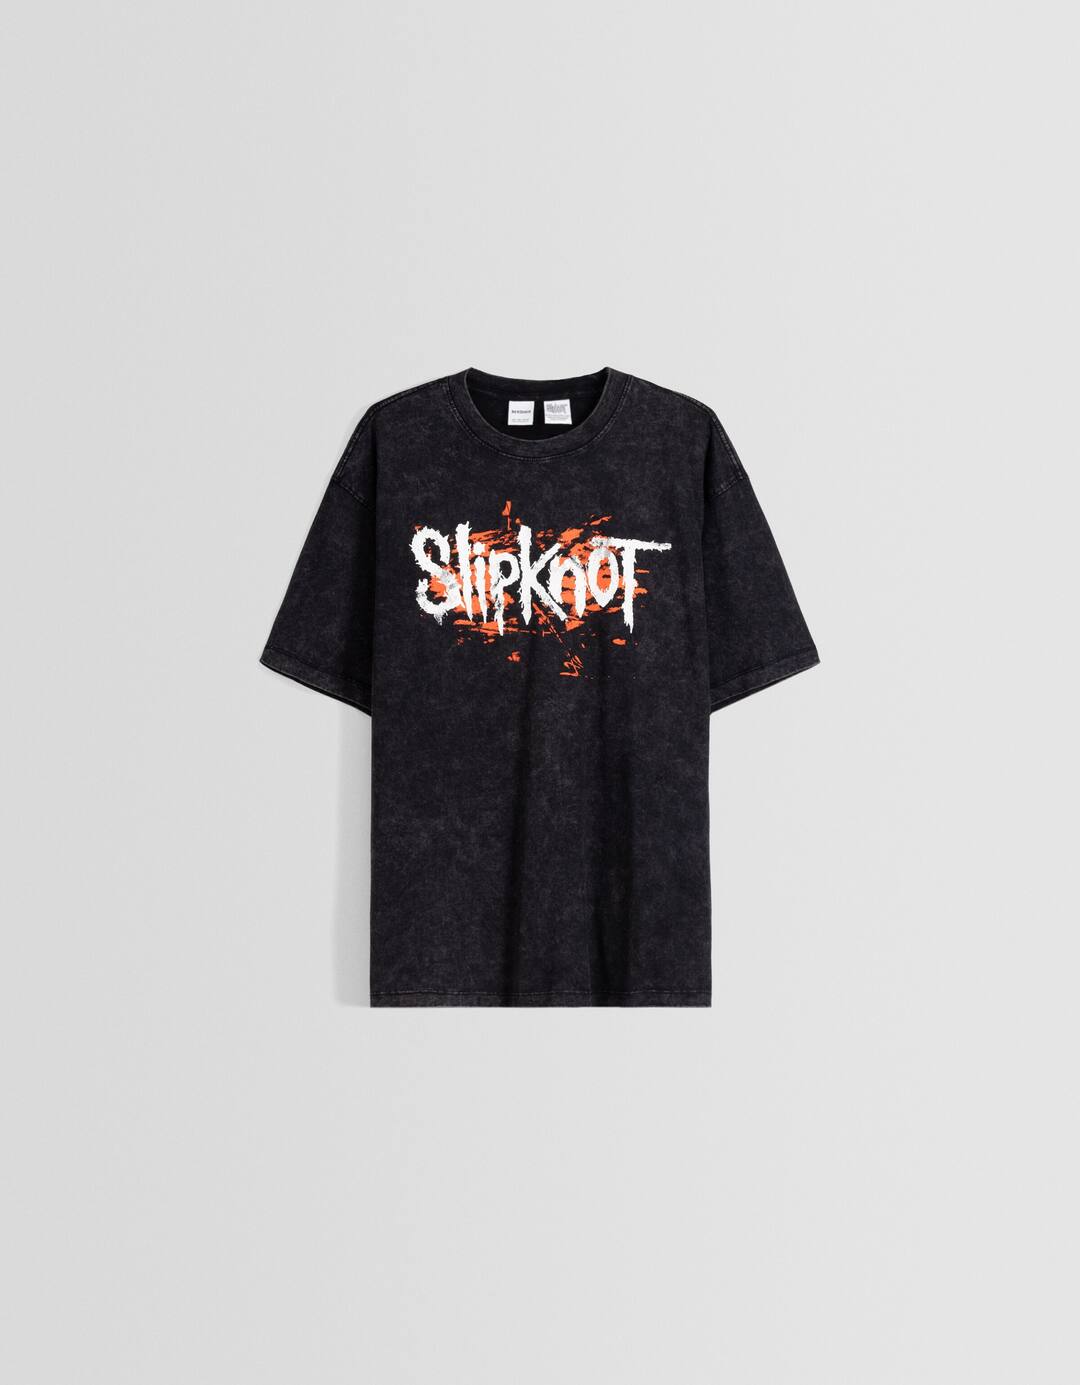 Slipknot print T-shirt with short sleeves and a boxy fit